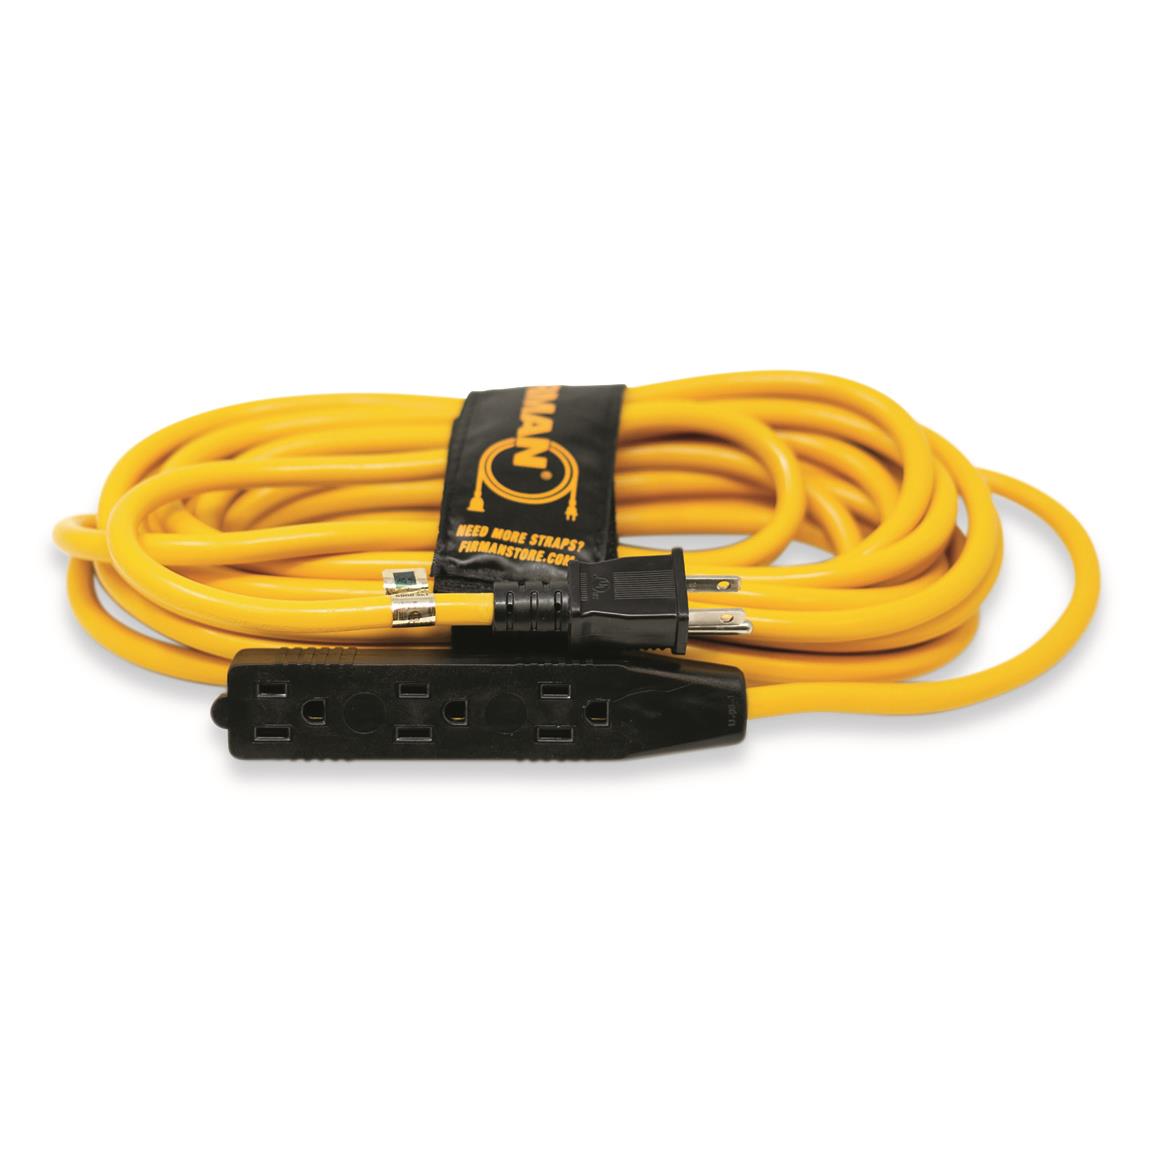 FIRMAN 25' 14 Gauge Generator Utility Cord with Triple Tap and Storage Strap